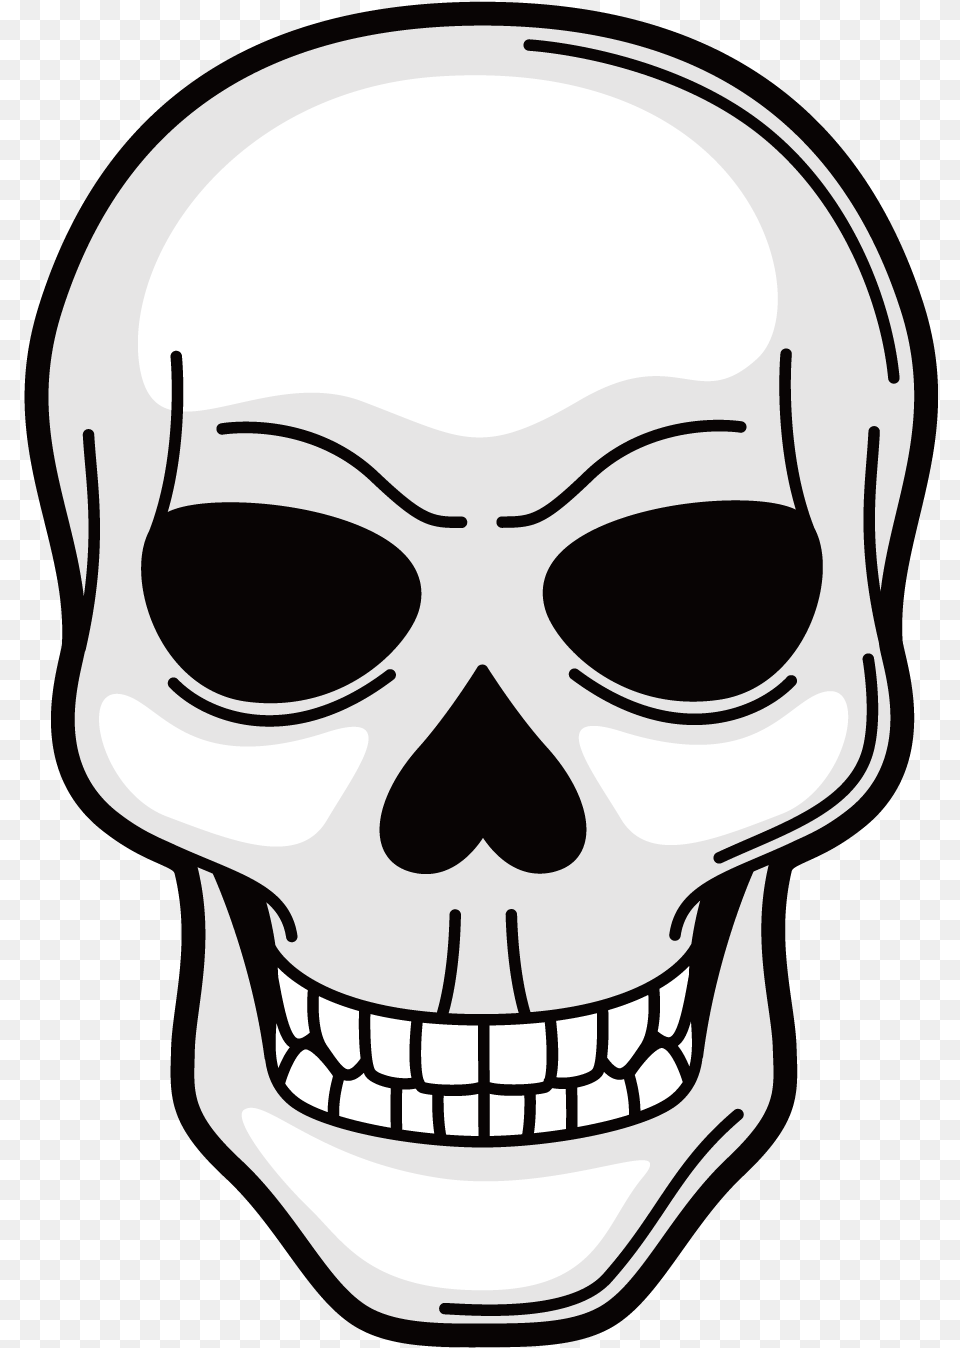 Symbol Tattoo Royalty Free Illustration Clip Art Black And White Skull, Stencil, Person, Face, Head Png